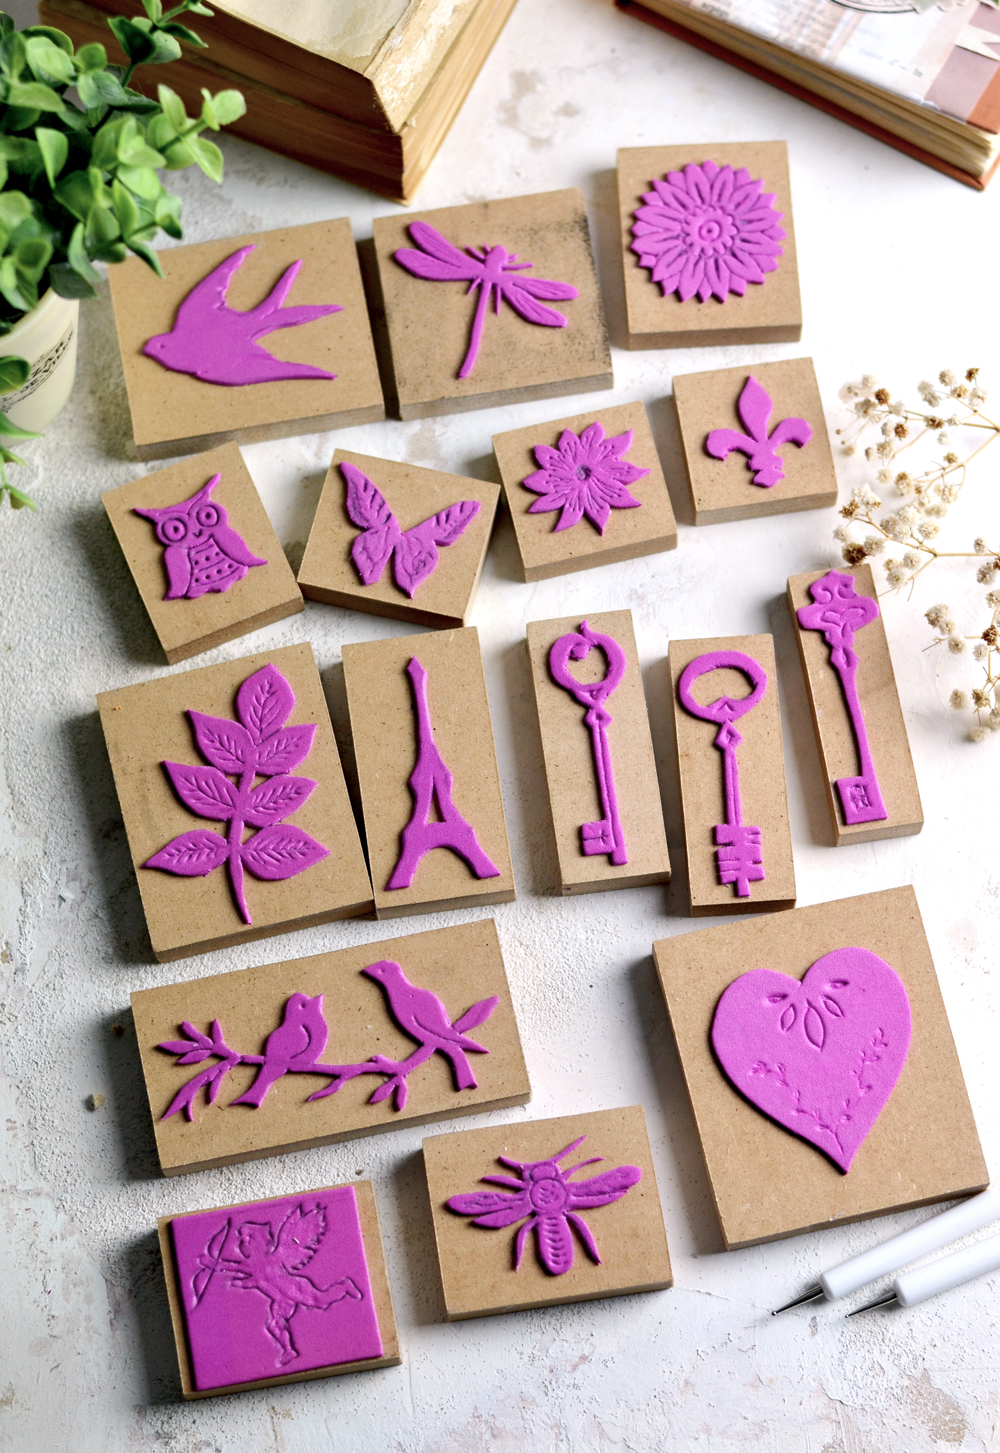 DIY Vintage Foam Stamps - learn how to easily make your own stamps using your favorite images, that can be used on so many of your creative projects!